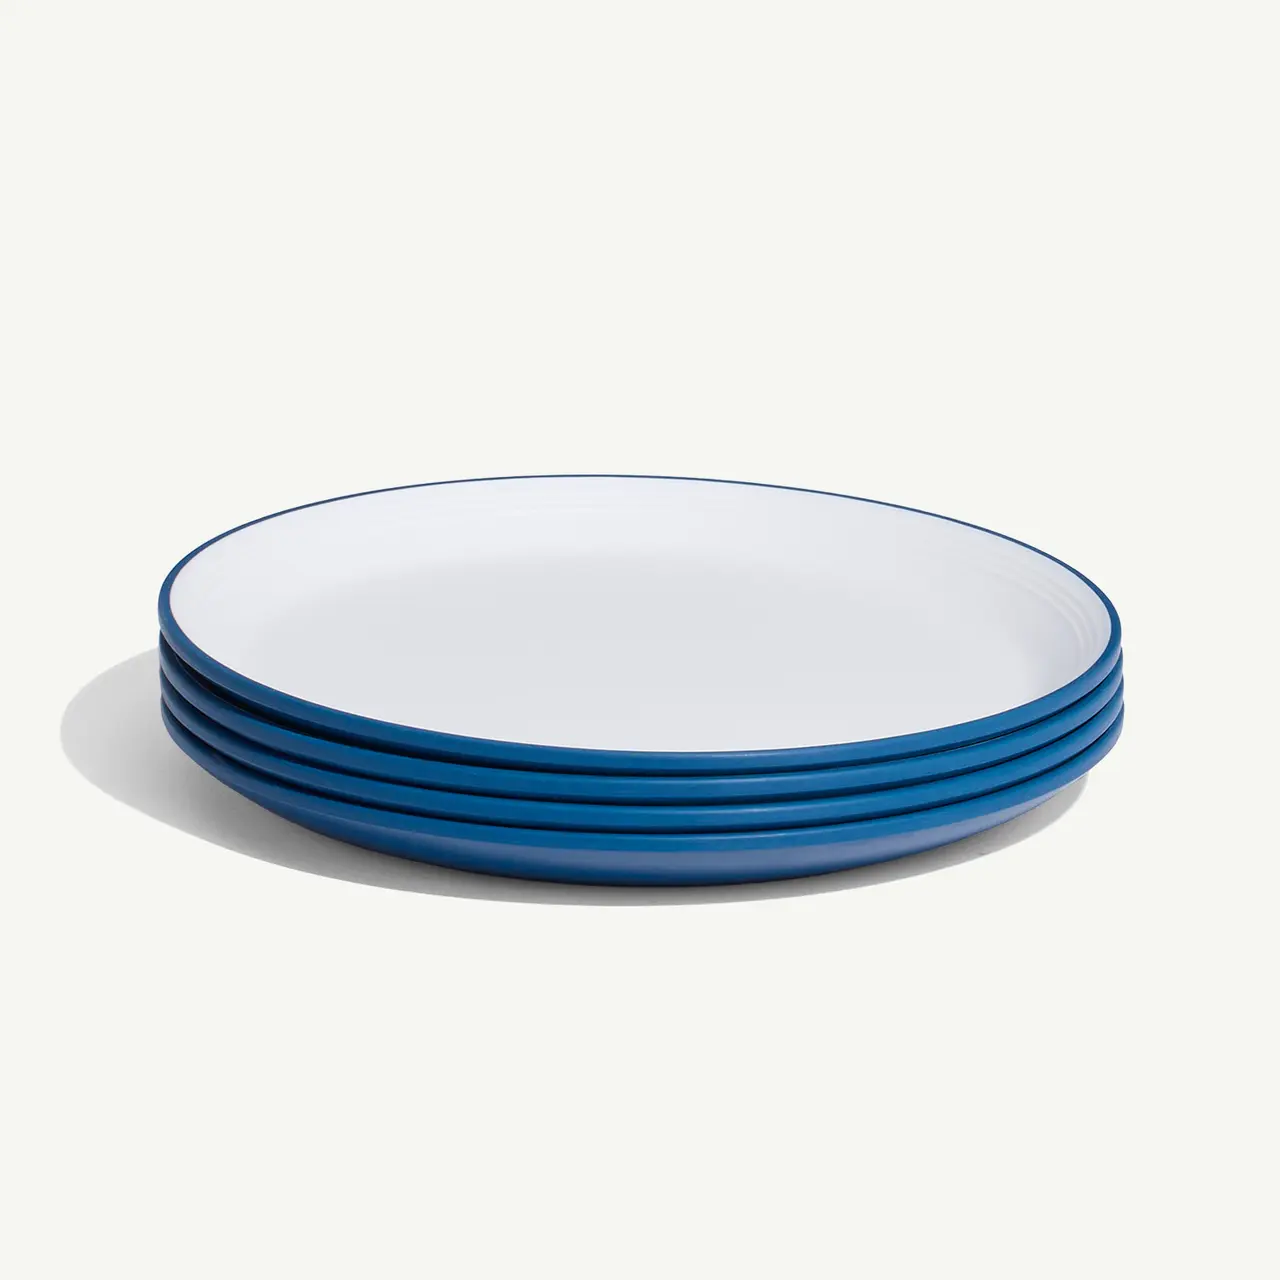 A stack of four white plates with blue rims on a white background.